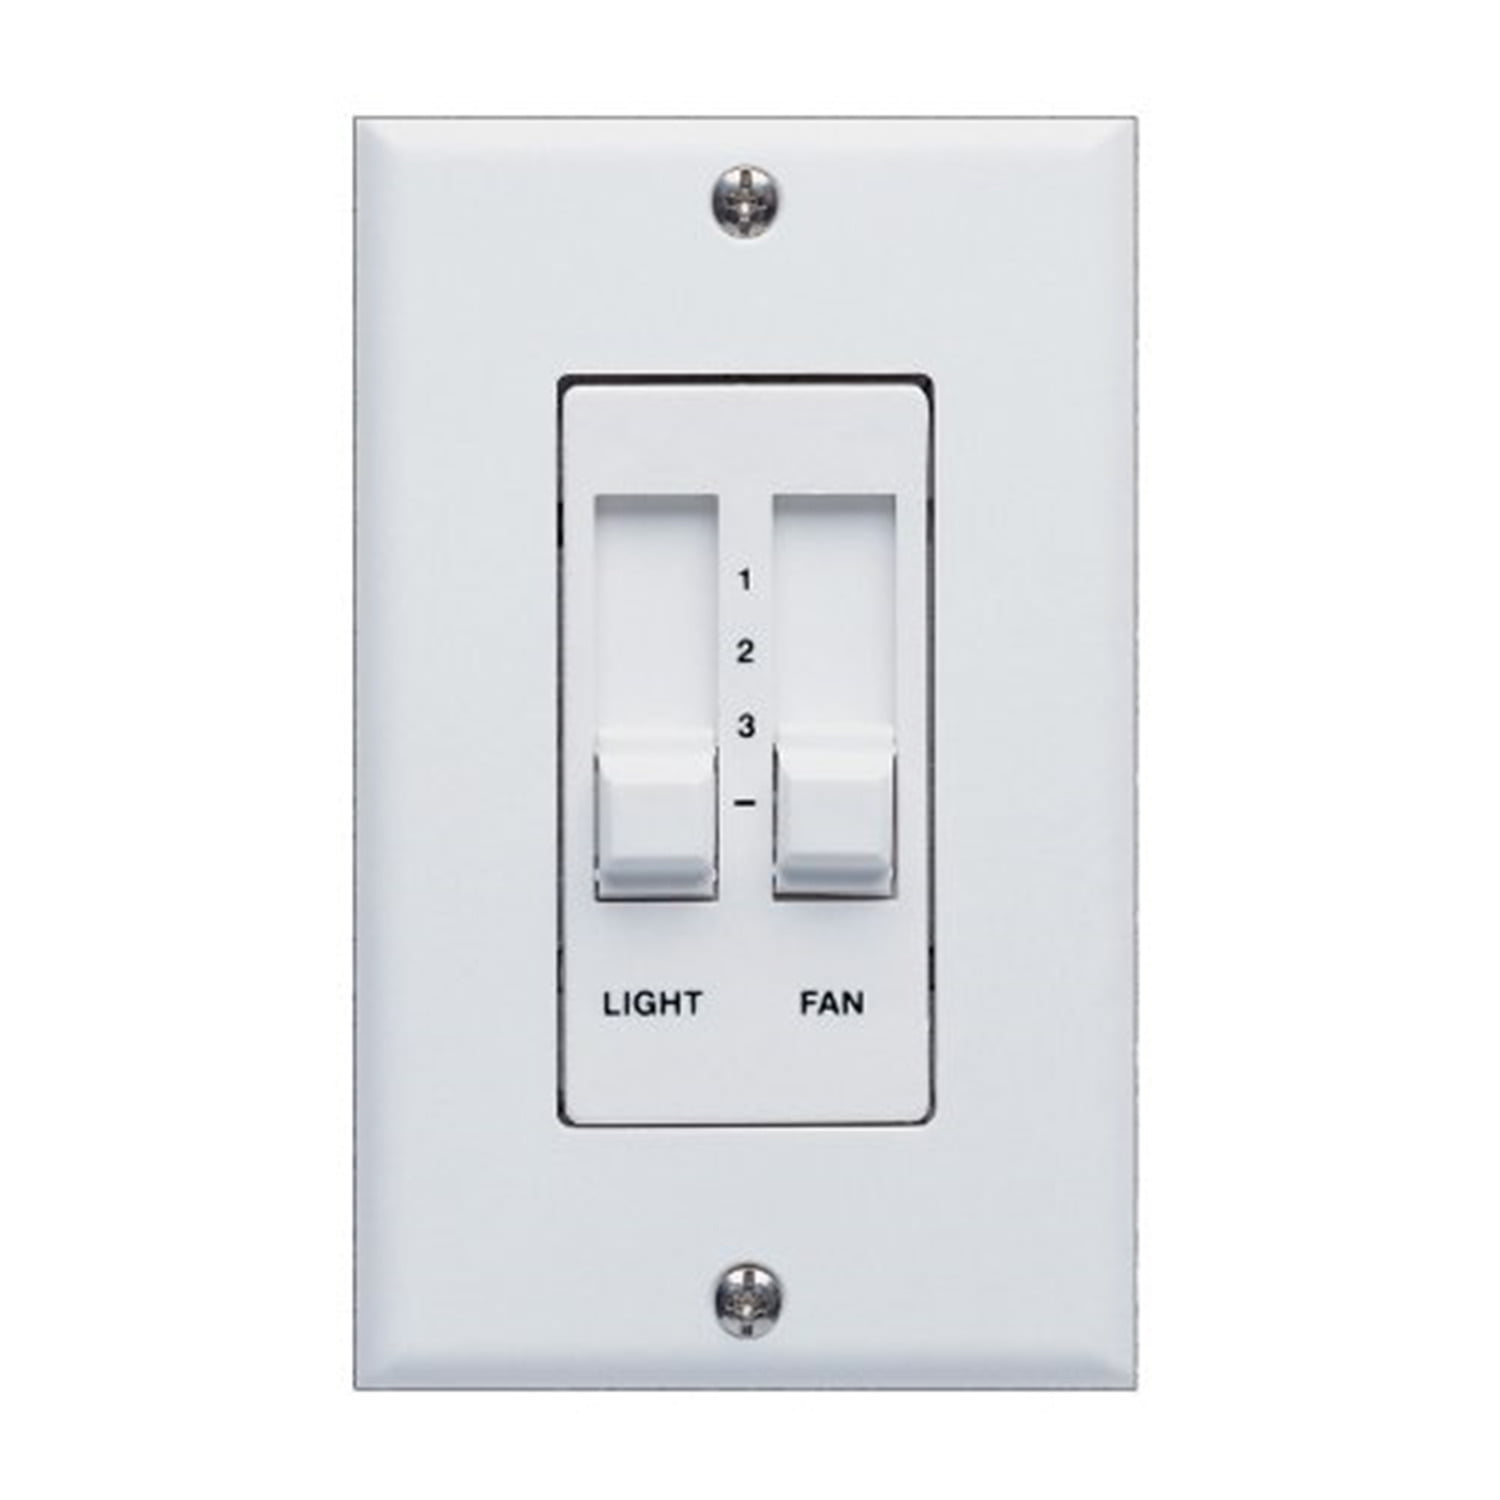 Leviton VPKIT-MDB Brown Vizia Color Change Kit for Dimmer/Fan Speed Control or Matching Remote Dimmer/Fan Speed Control